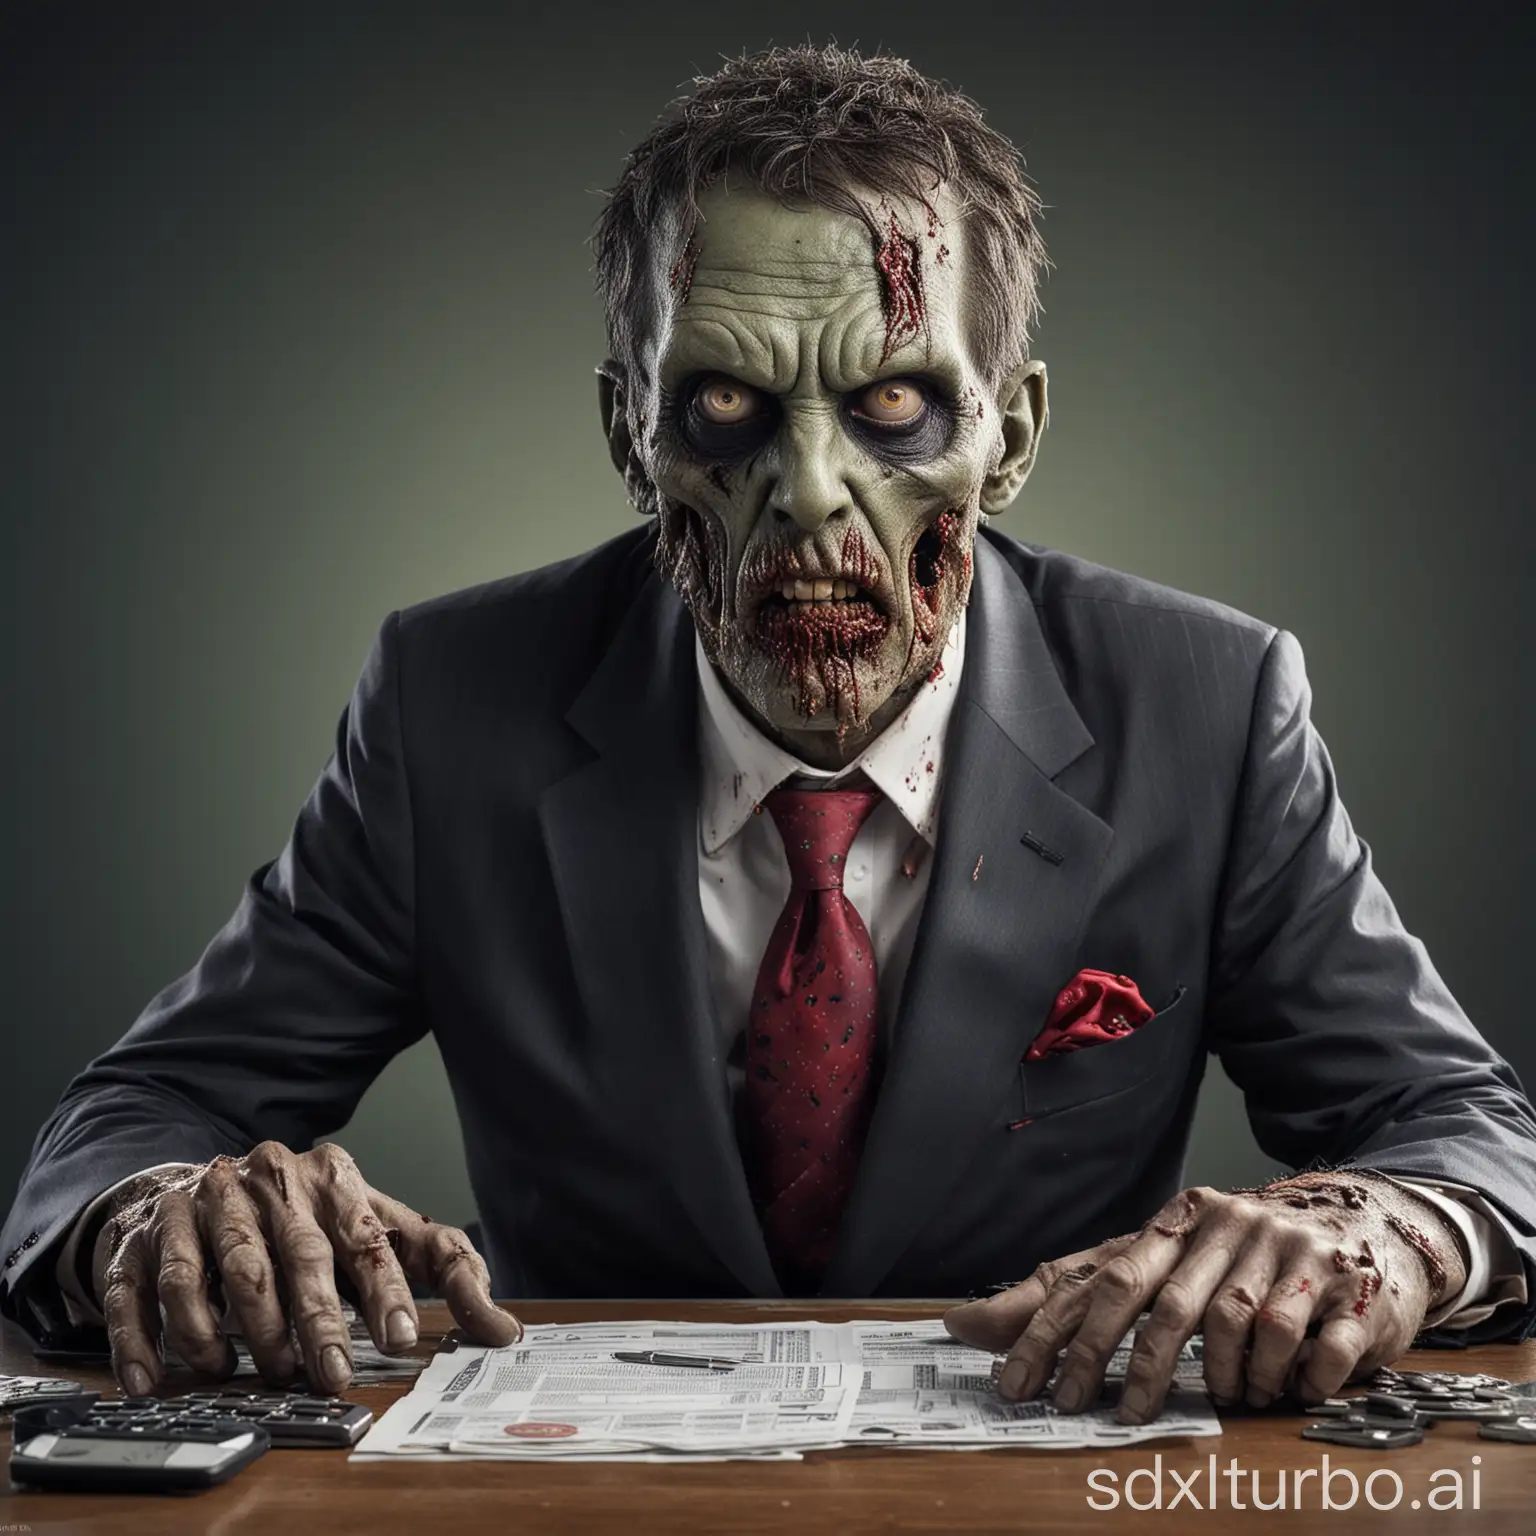 zombie, depicted as an ruthless CEO of a Fortune 500 company, surrealism, Sony FE 70-200mm f/2.8 GM OSS Lens